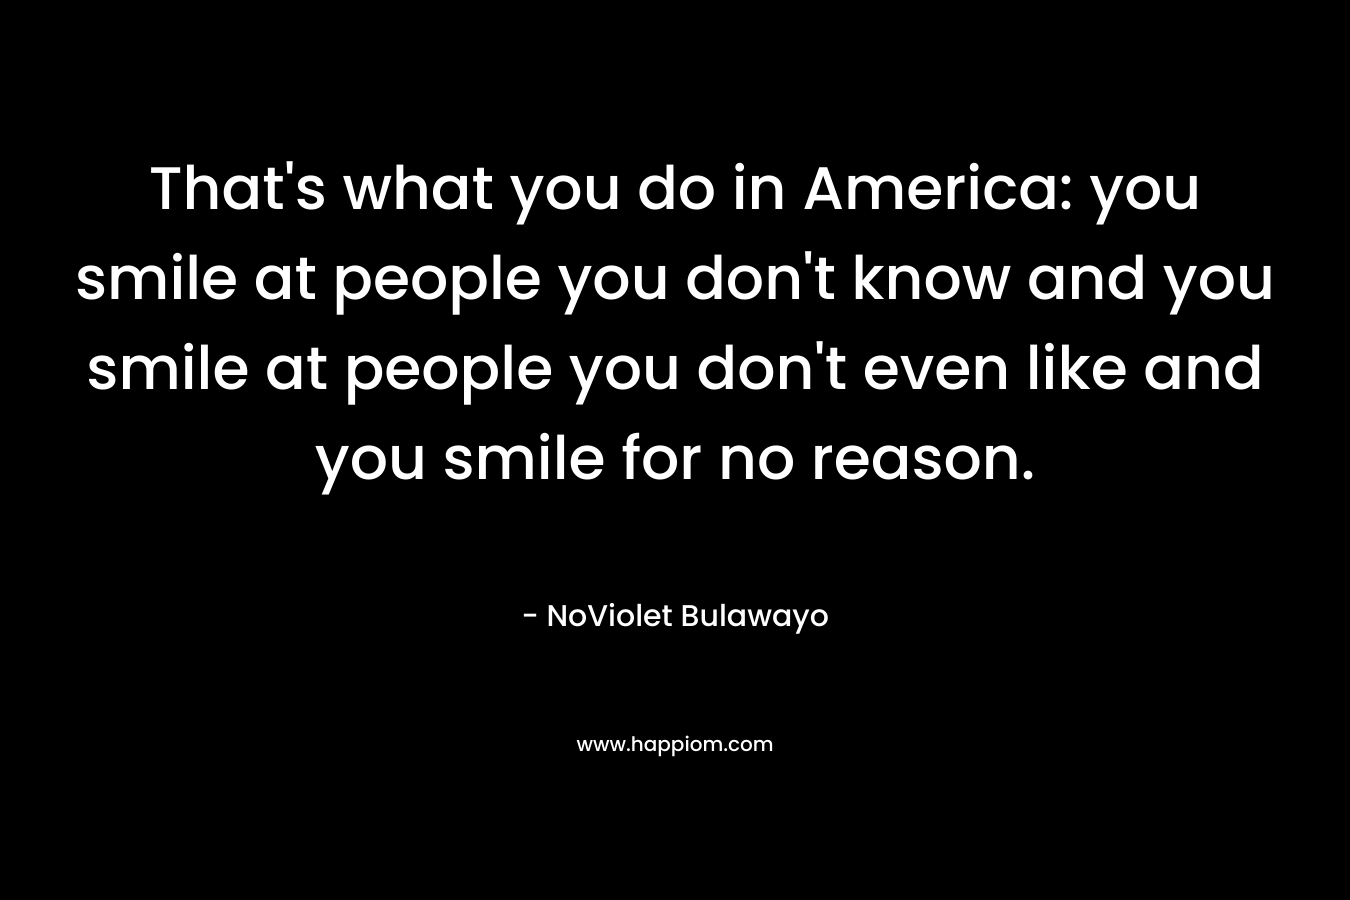 That's what you do in America: you smile at people you don't know and you smile at people you don't even like and you smile for no reason.